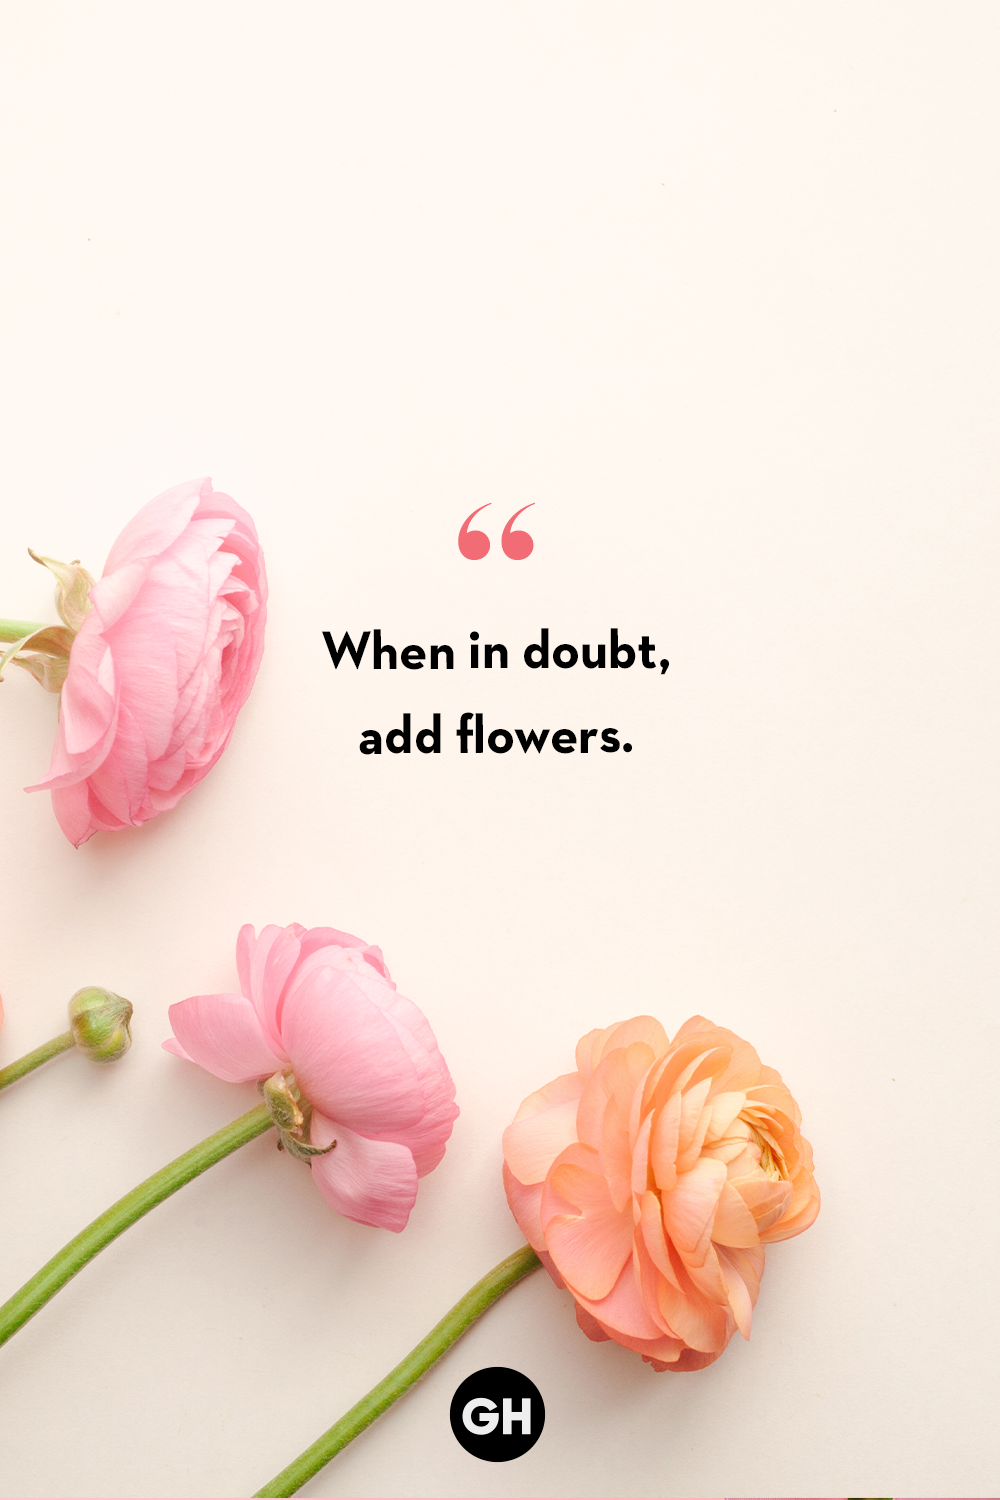 Astonishing Collection of Full 4K Flower Images with Quotes: Over 999 ...